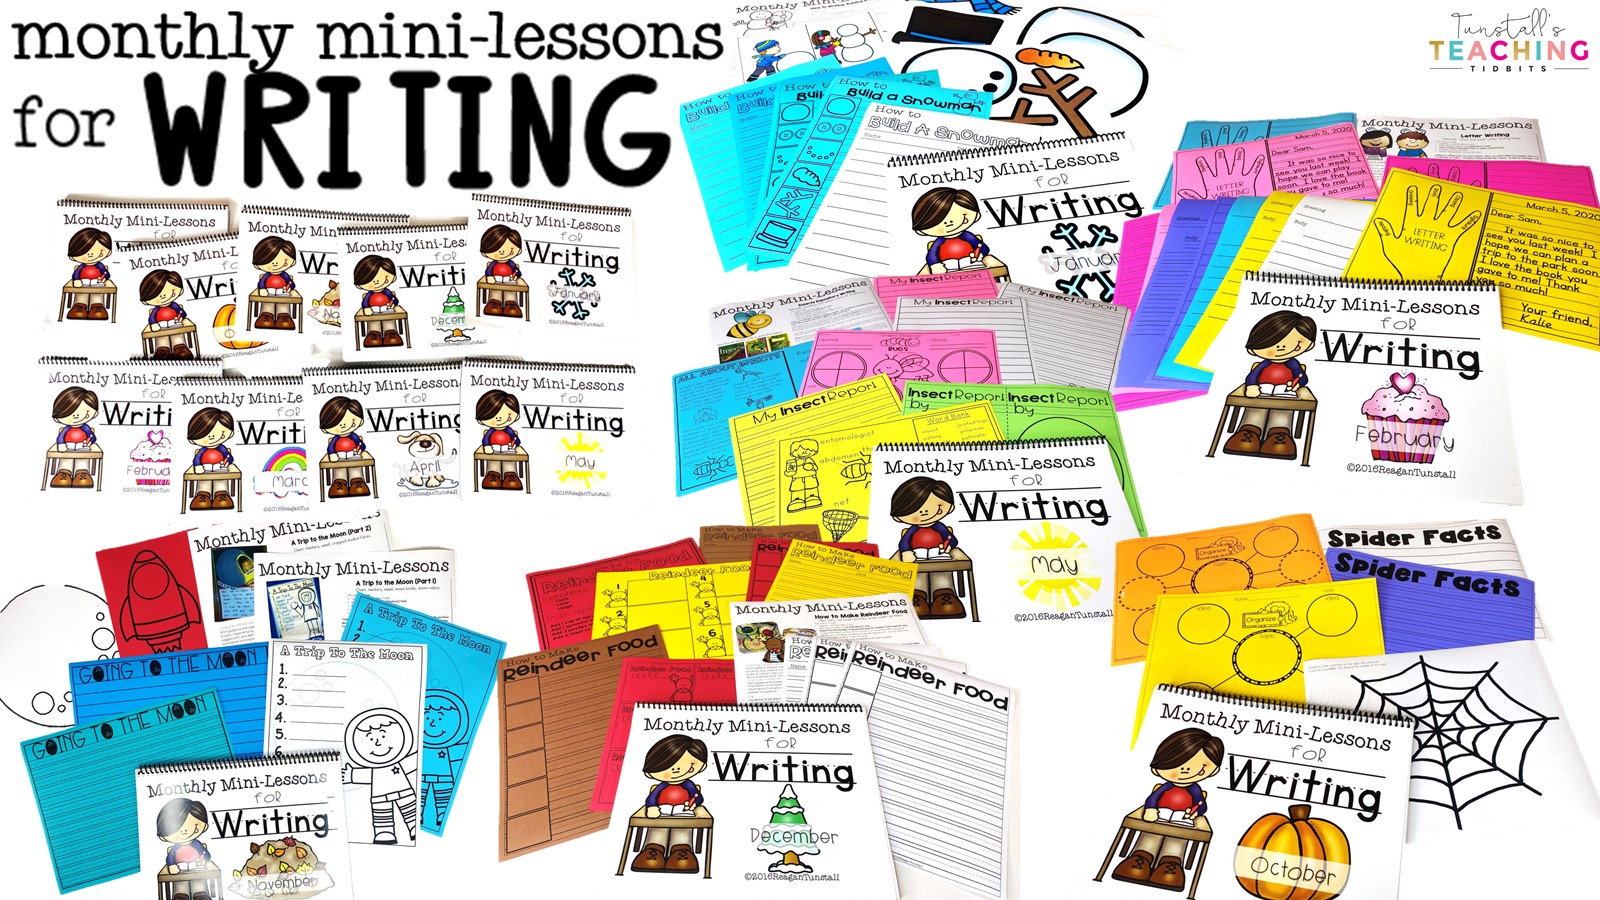 monthly mini-lessons for writing 